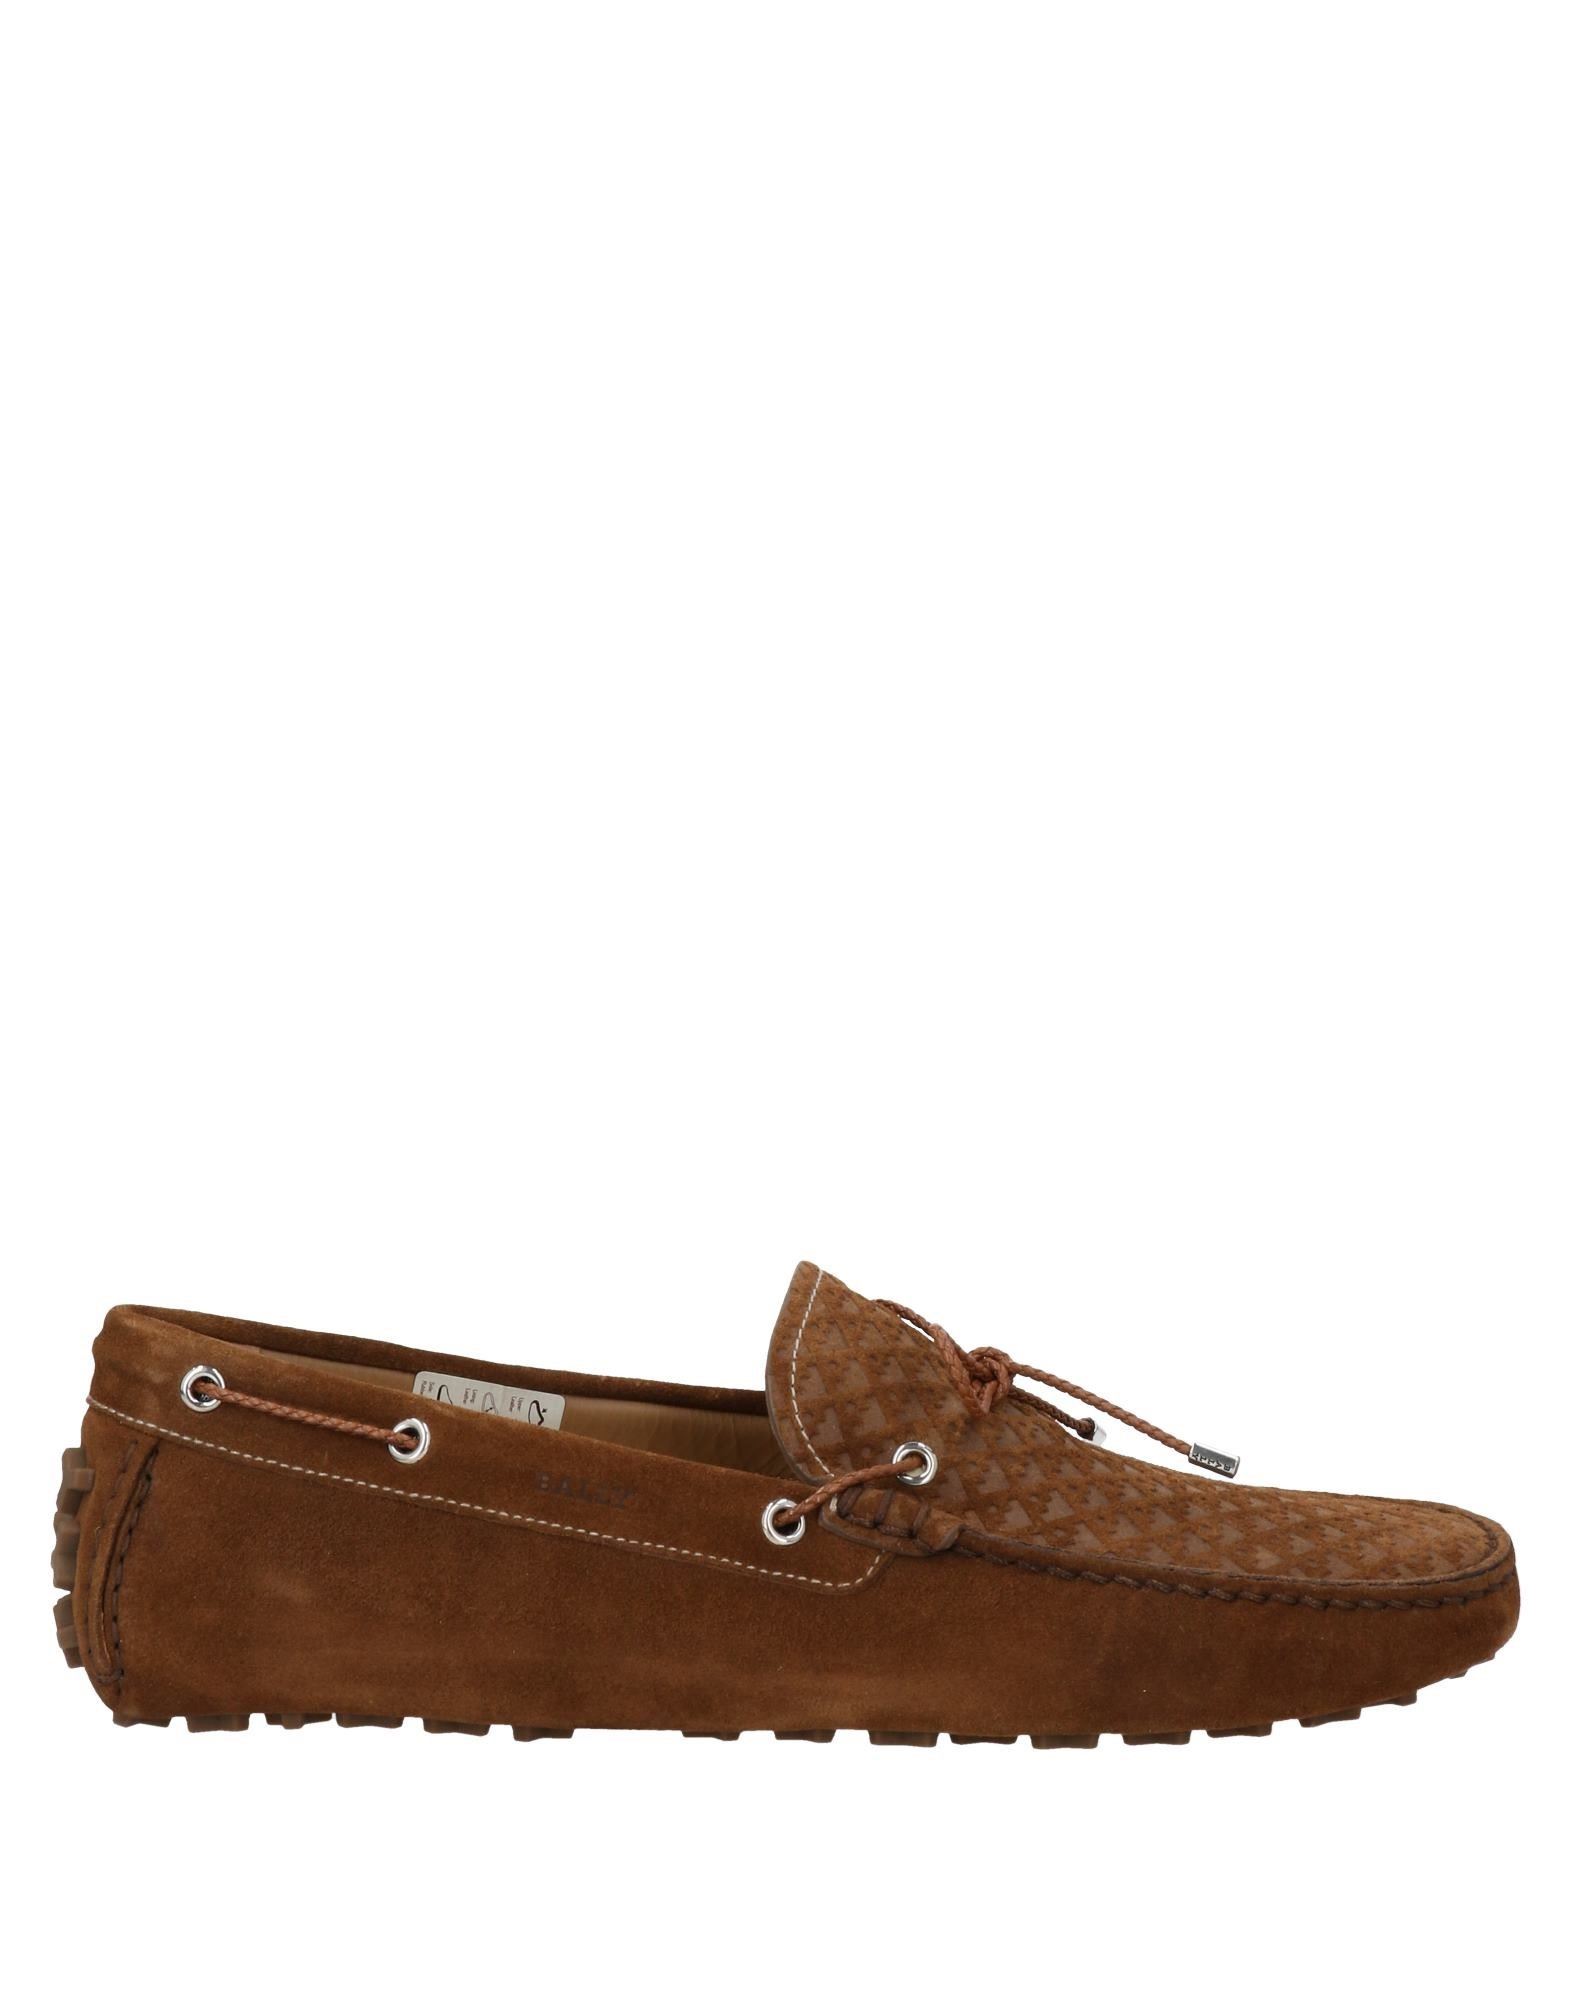 BALLY Loafers - Item 11863402